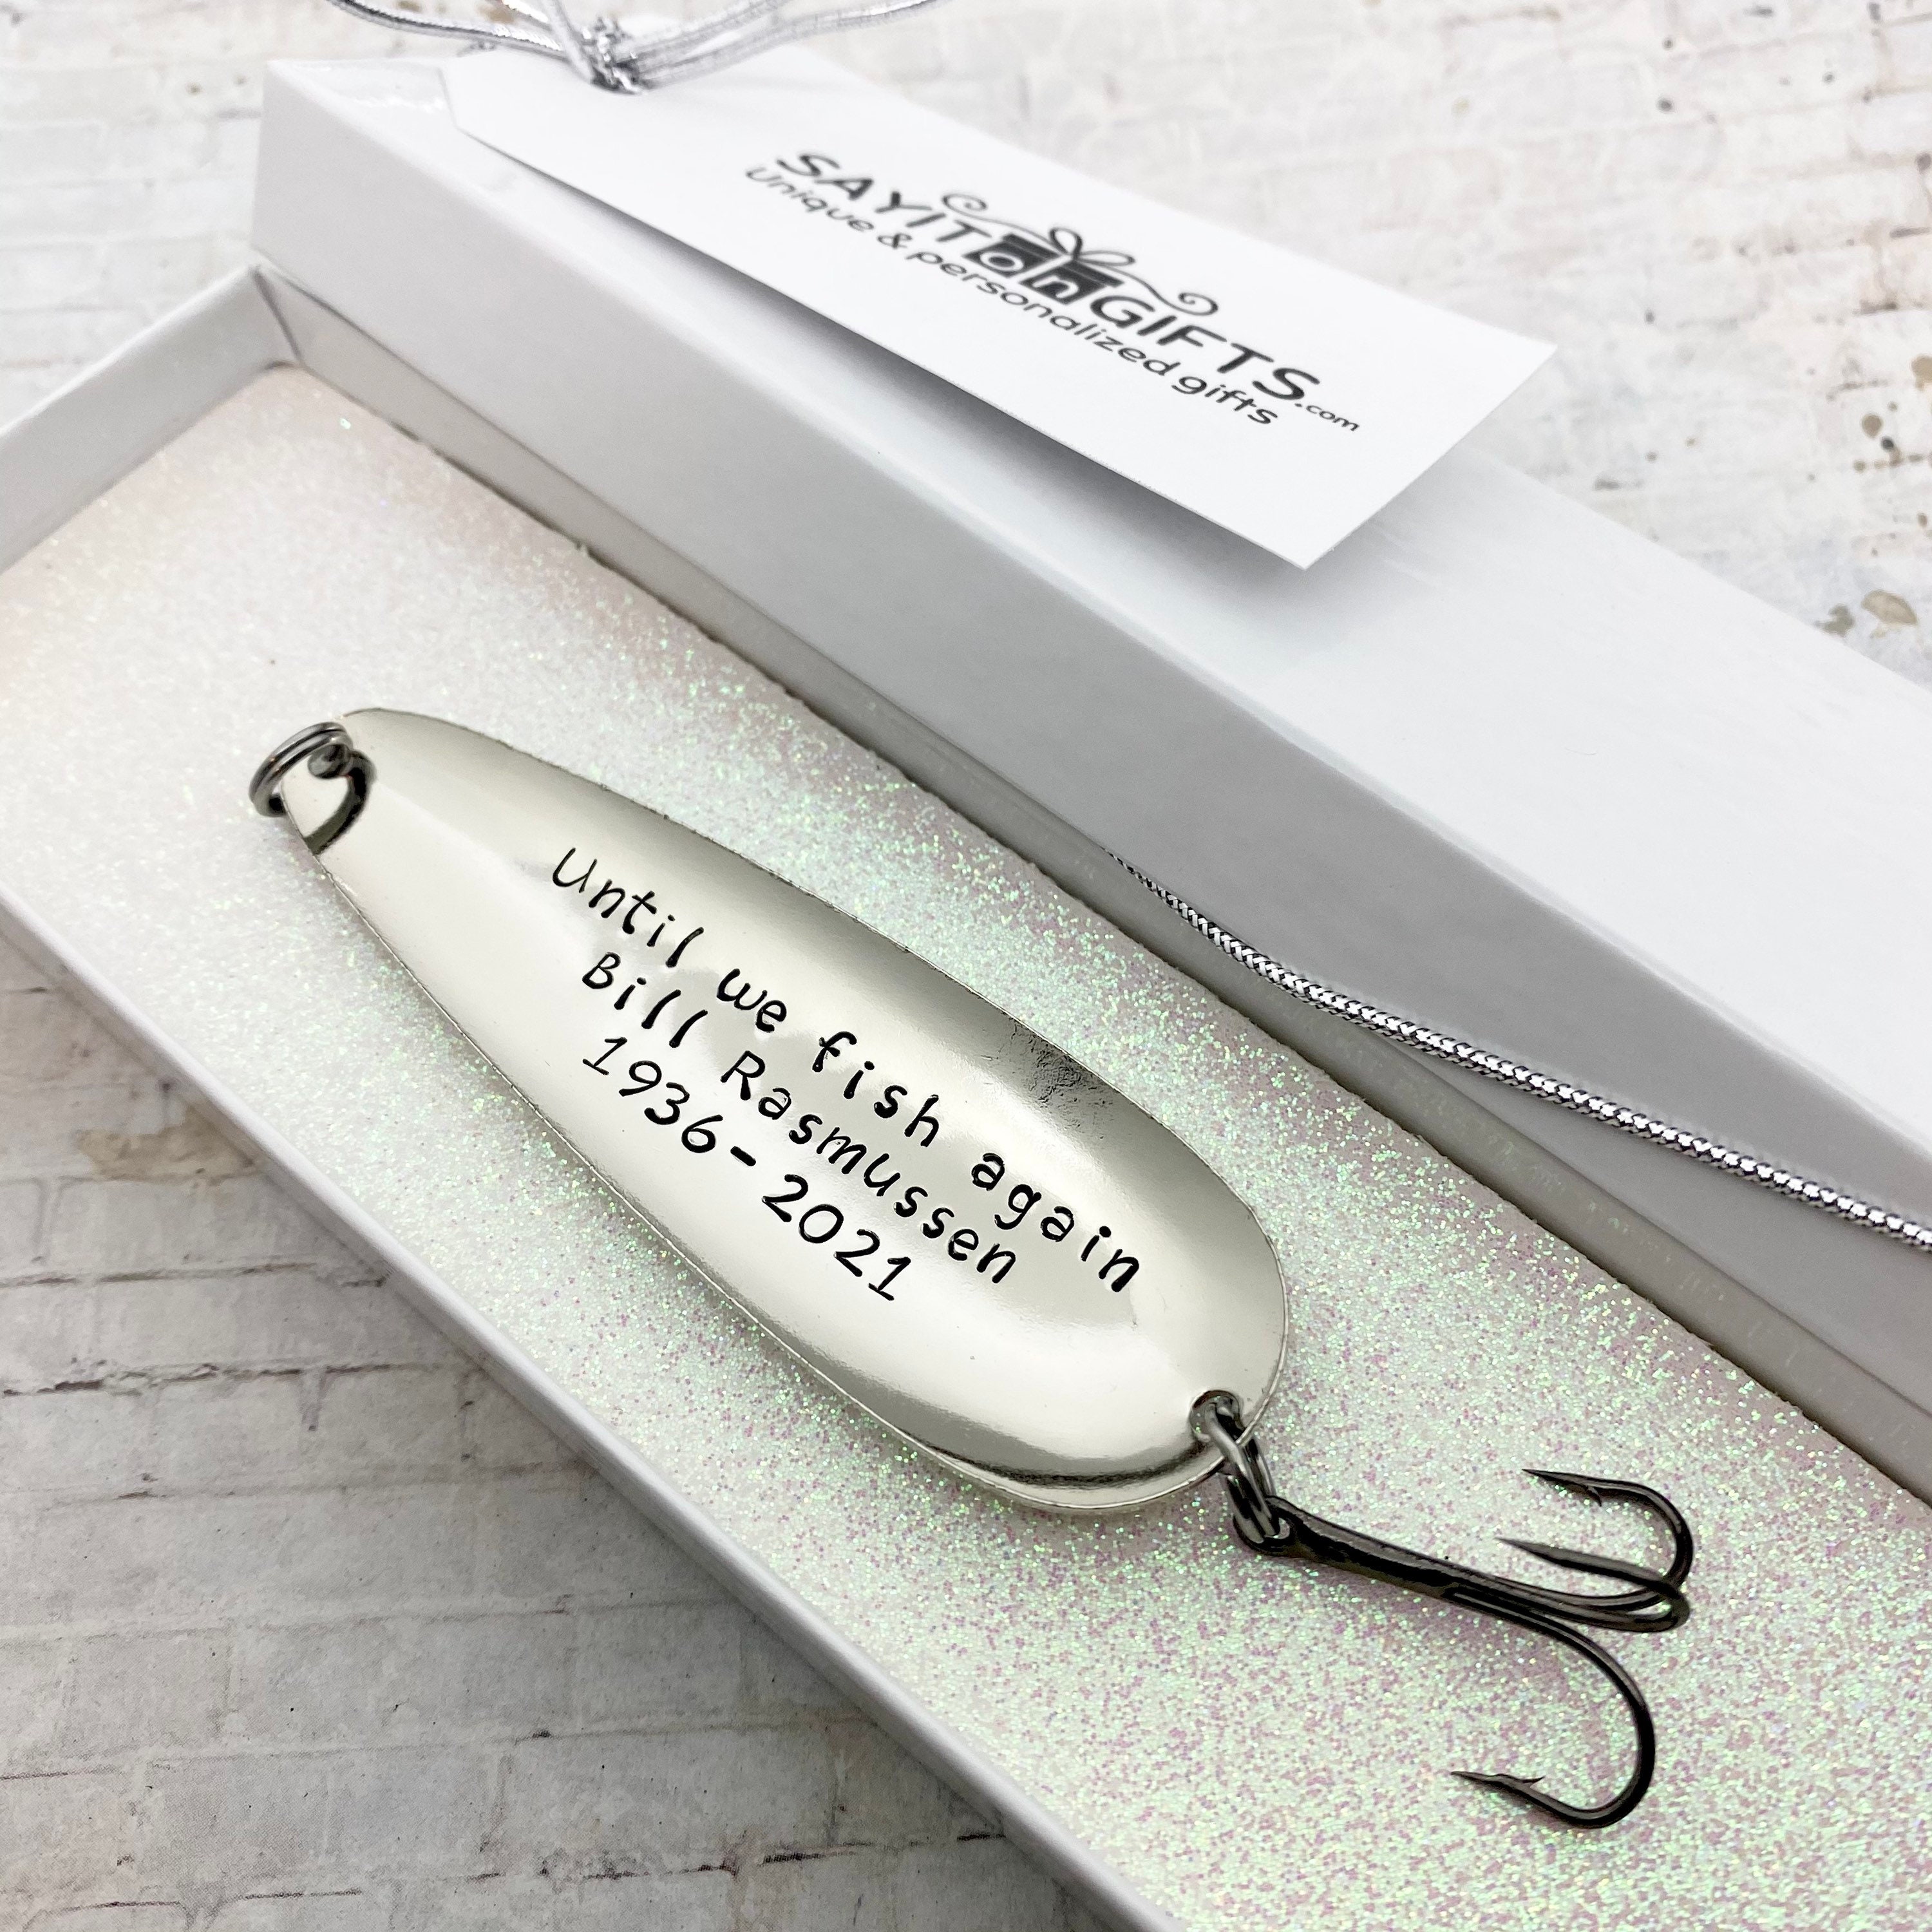 Someone I Love Is Fishing In Heaven - Personalized Fishing Lure, Memor -  Customizeaf™